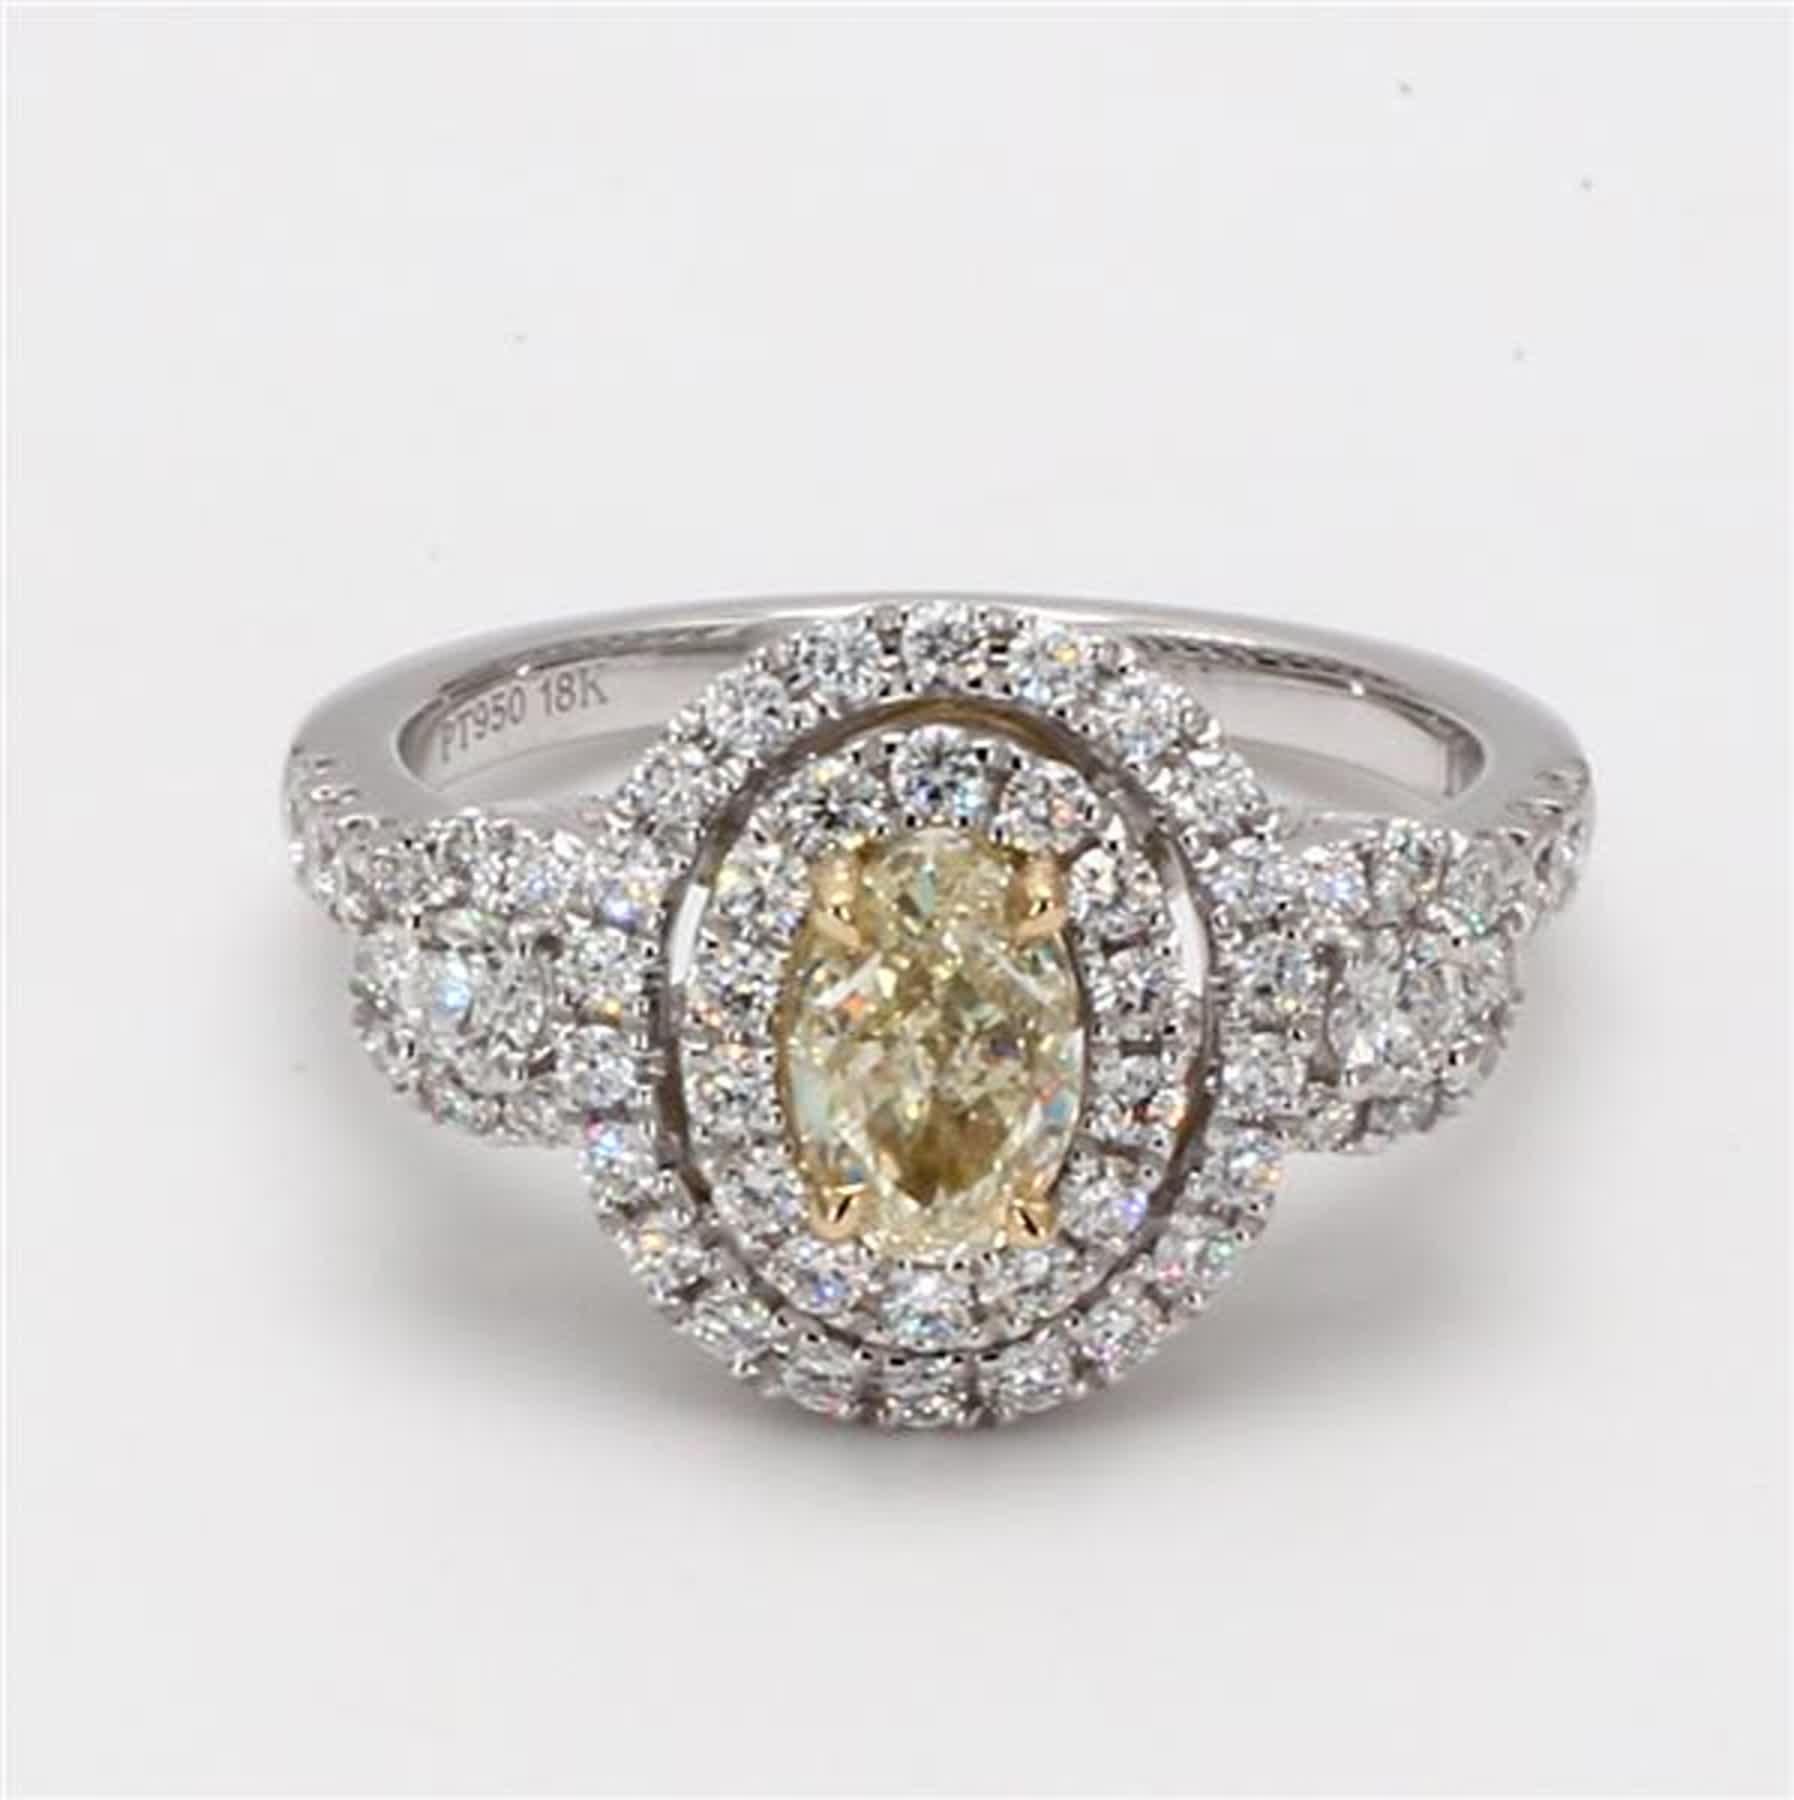 RareGemWorld's classic diamond ring. Mounted in a beautiful 18K Yellow and White Gold and Platinum setting with a natural oval cut yellow diamond. The yellow diamond is surrounded by round natural white diamond melee. This ring is guaranteed to